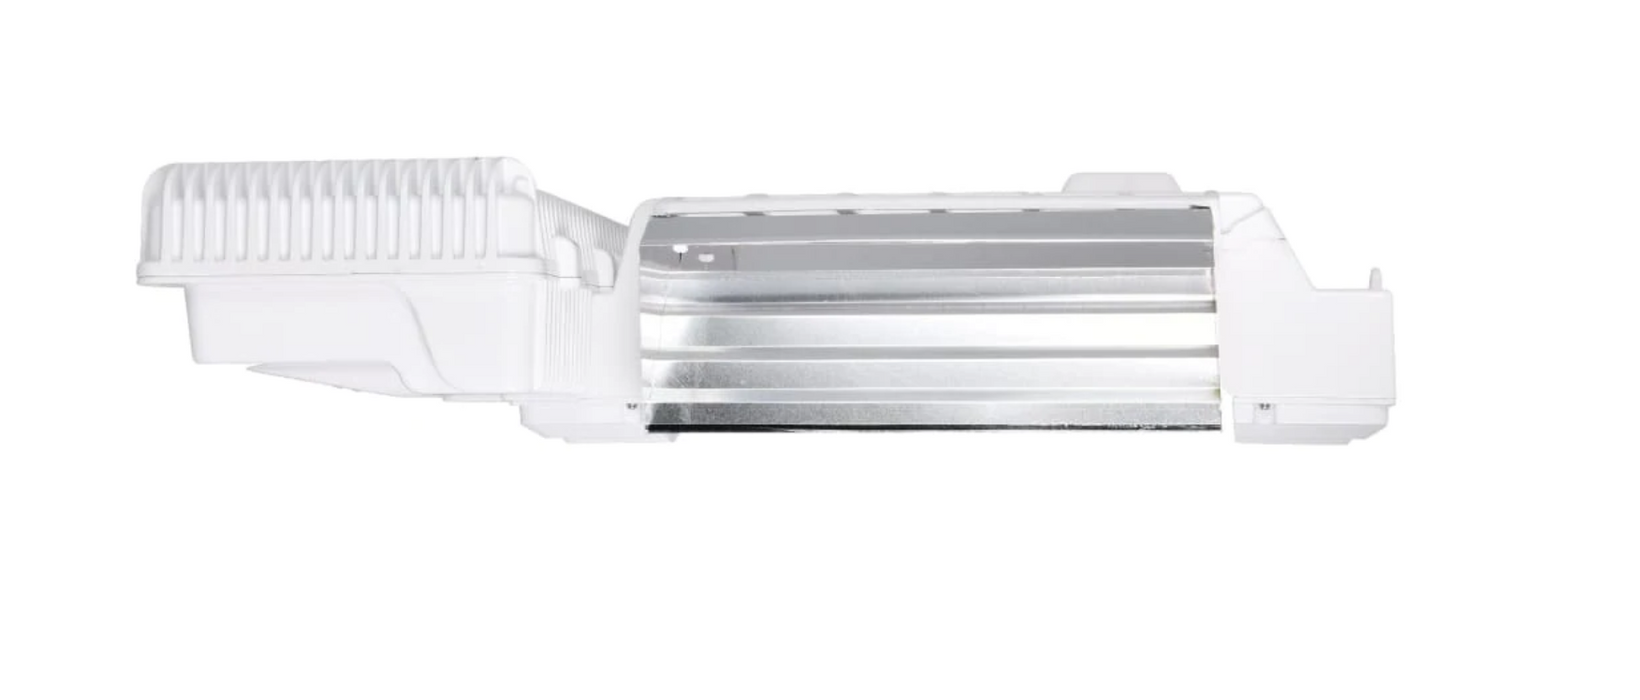 Grower's Choice GC- 1000W MP CMH 208V-277V Horticultural Lighting Fixture Master Pursuit - Grower's Choice - Ambient Home